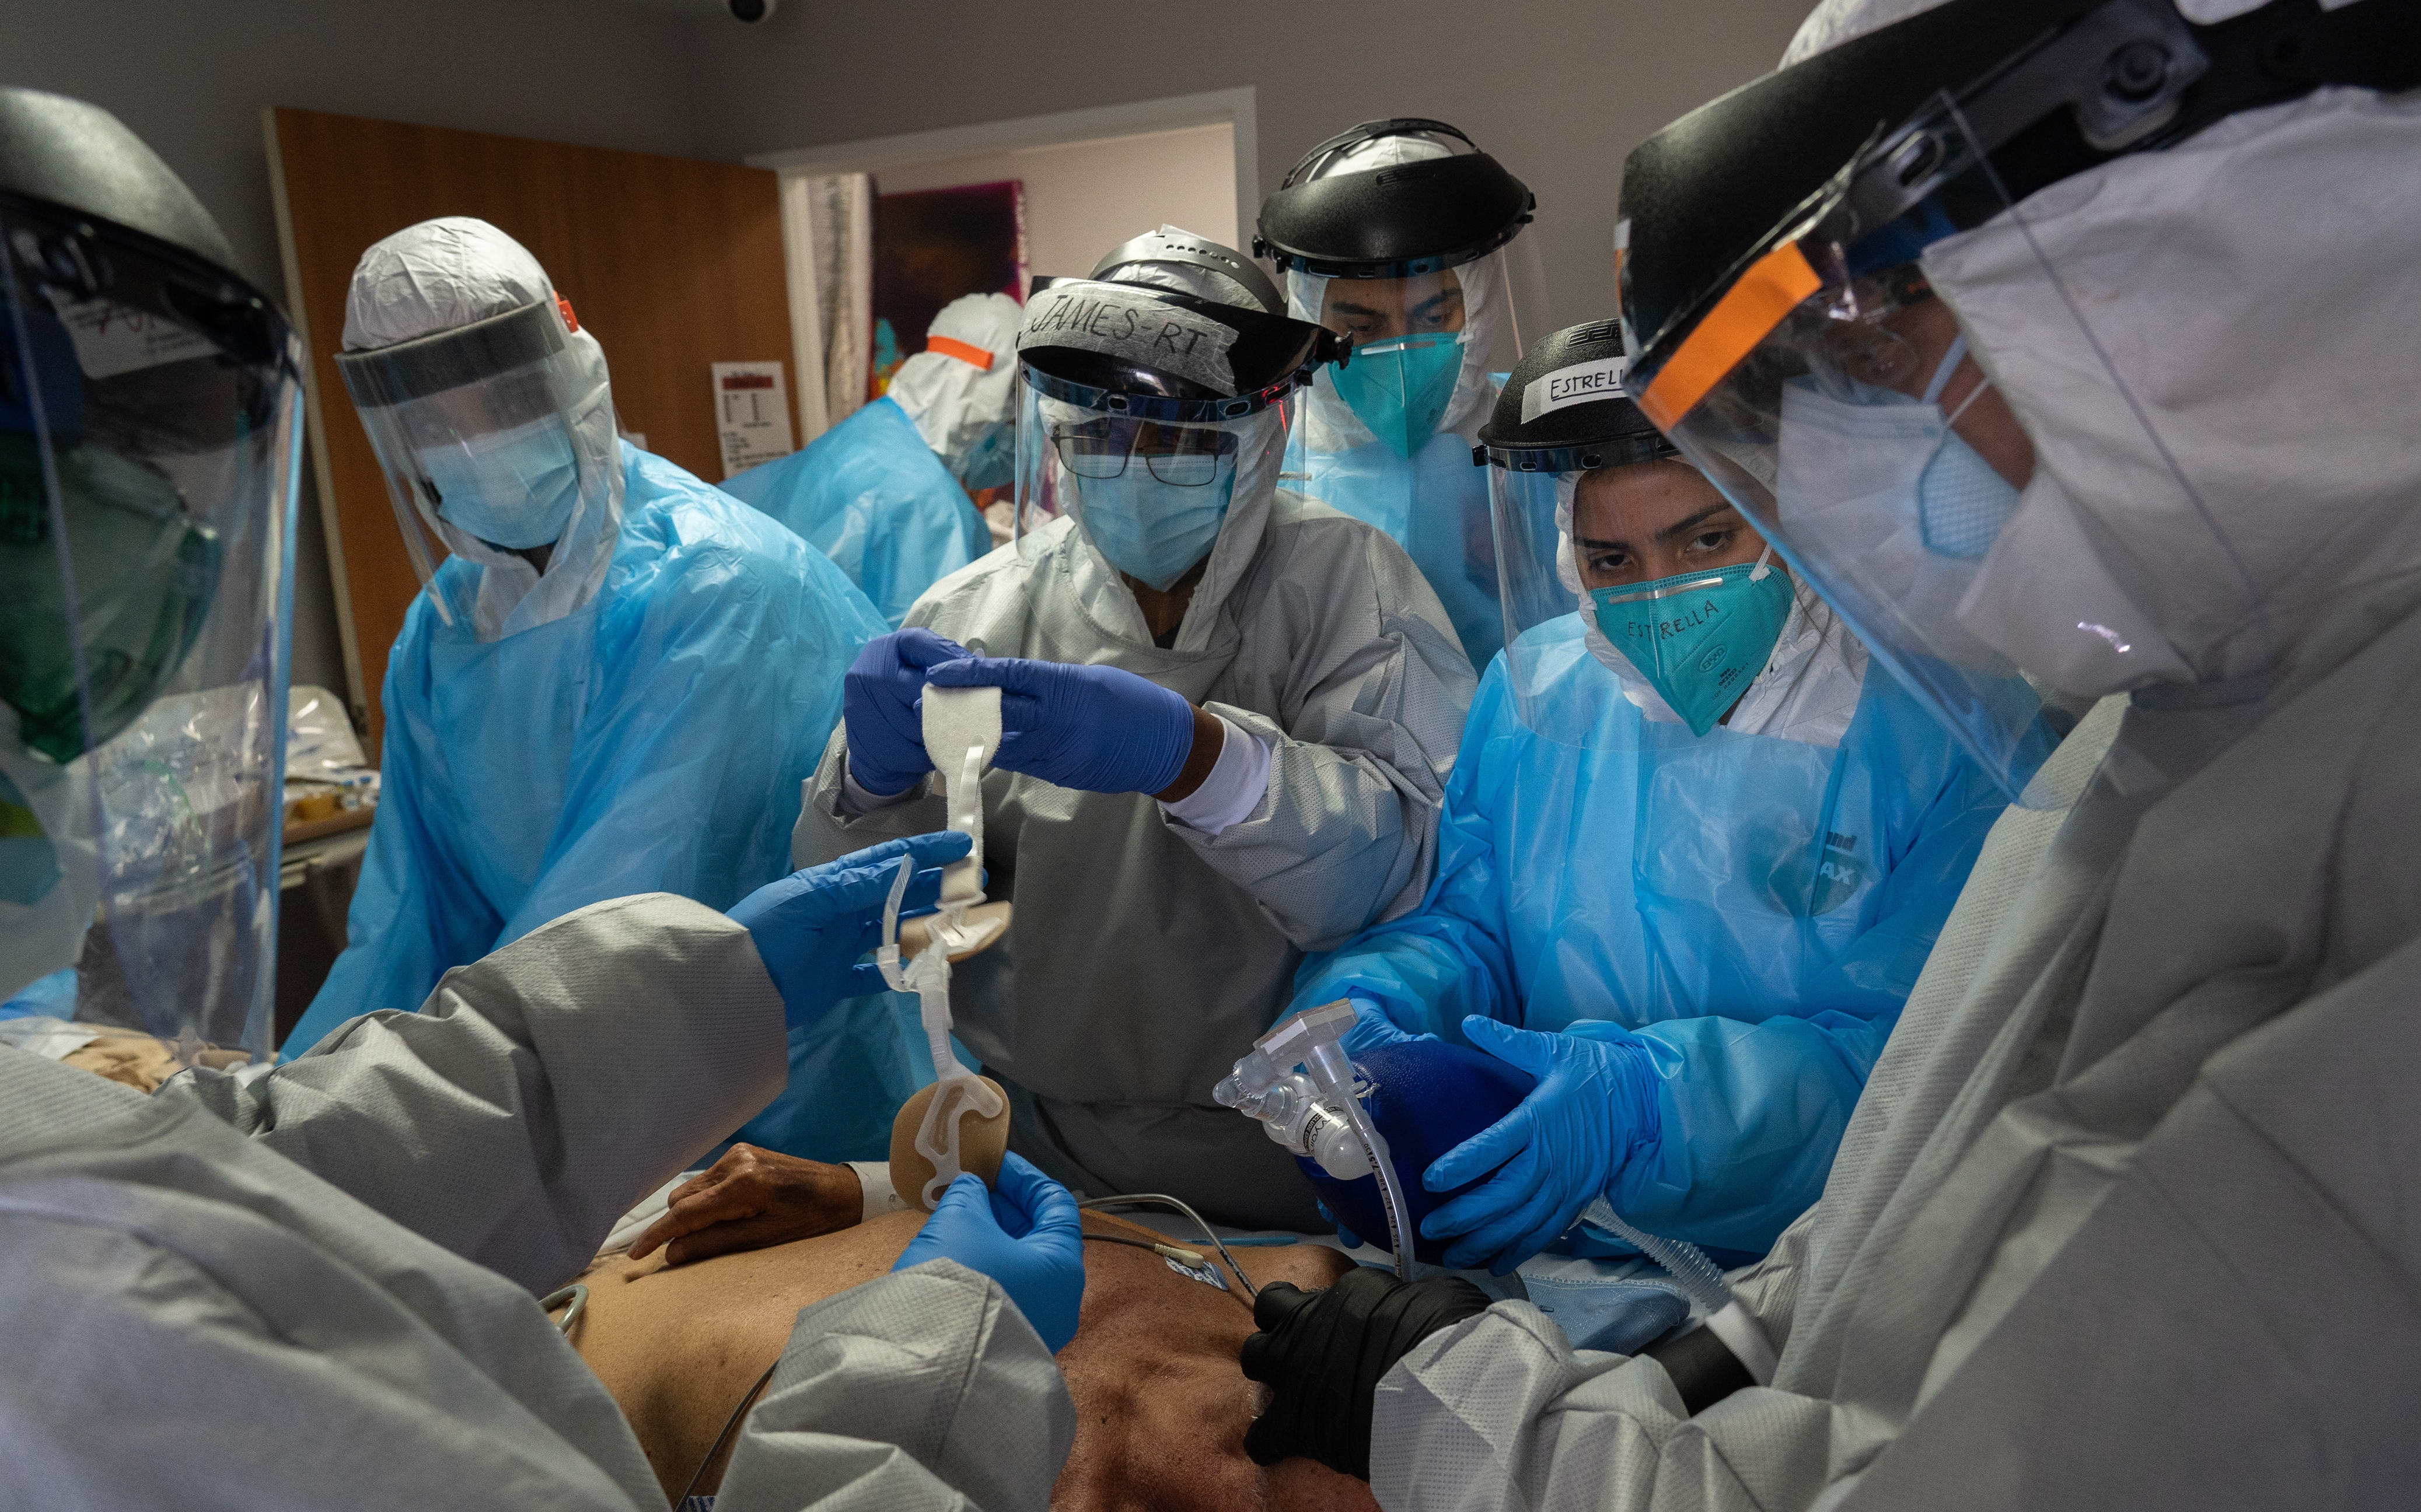 Medical workers wearing personal protective equipment (PPE) treat a patient suffering from the coronavirus disease in the Intensive Care Unit (ICU) of the United Memorial Medical Center in Houston, Texas, the United States.